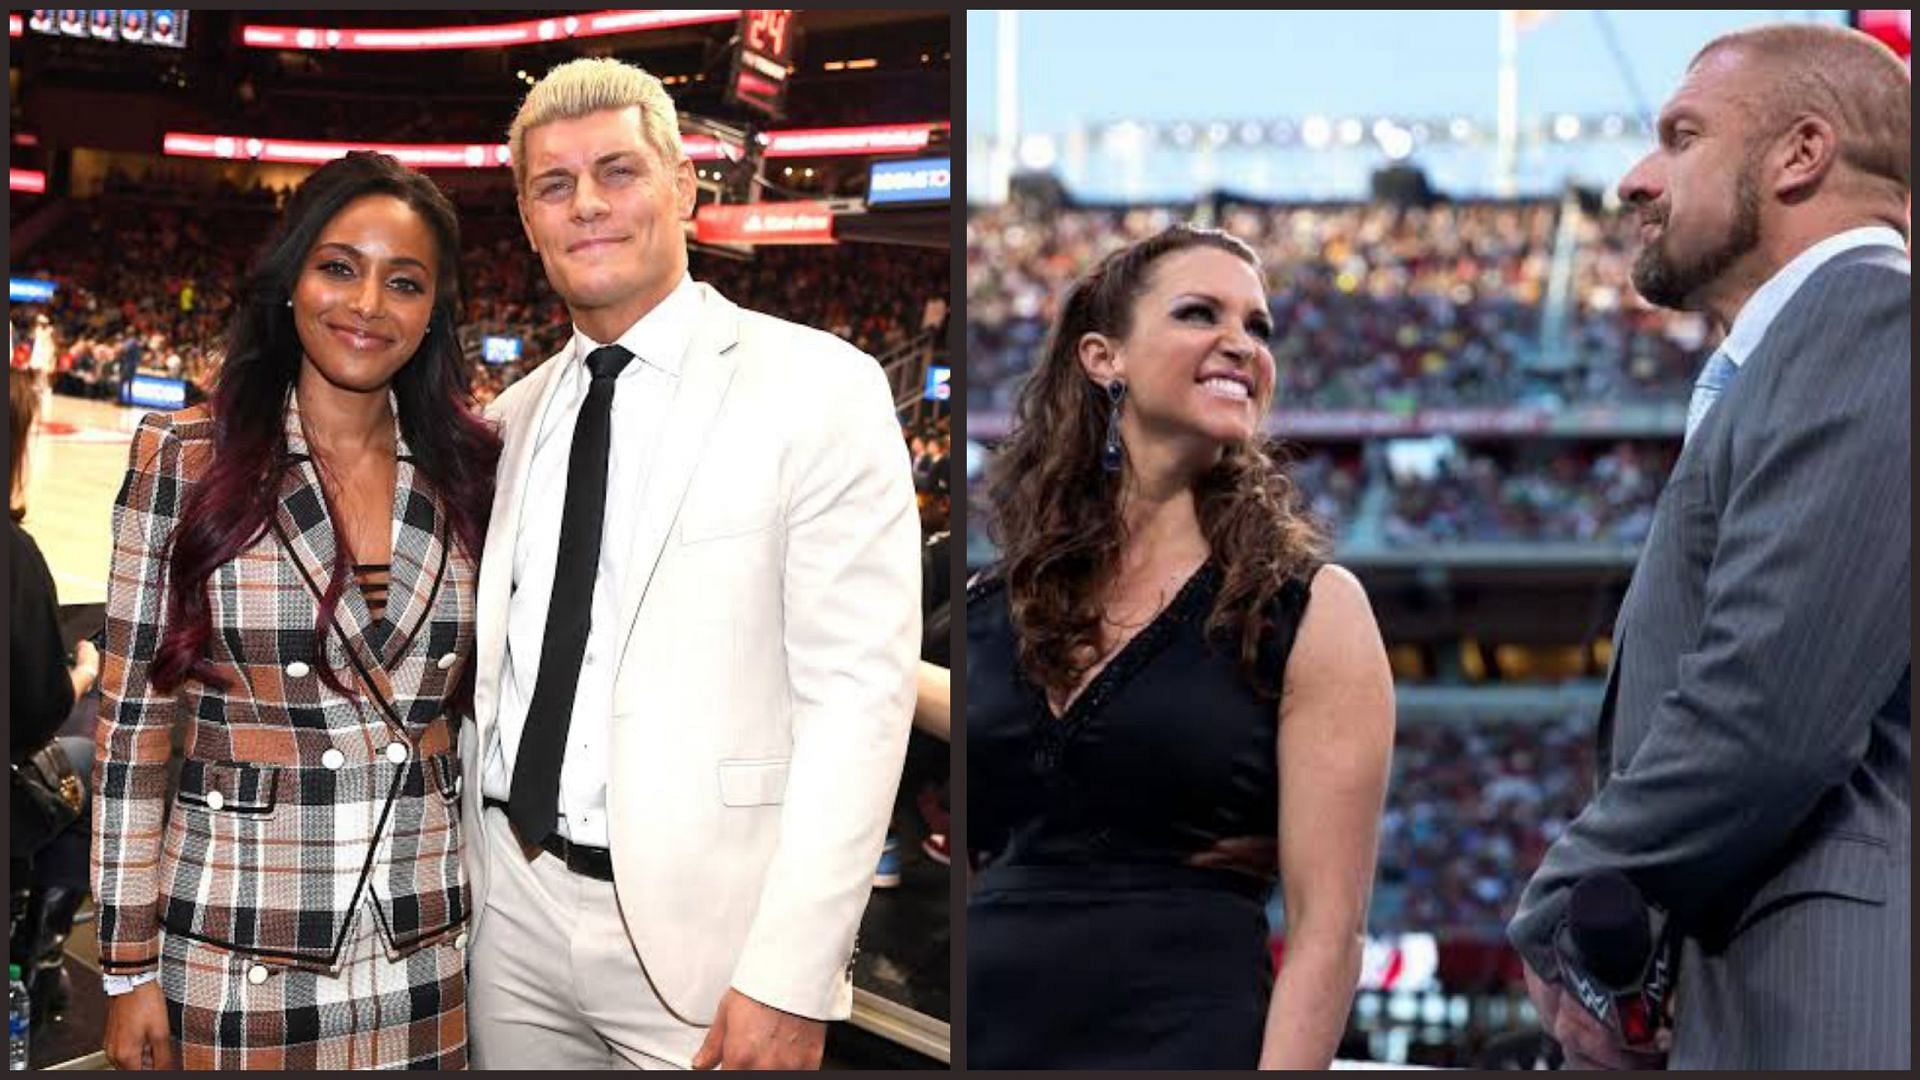 Will we see these mixed matches involving Brandi and Cody Rhodes?